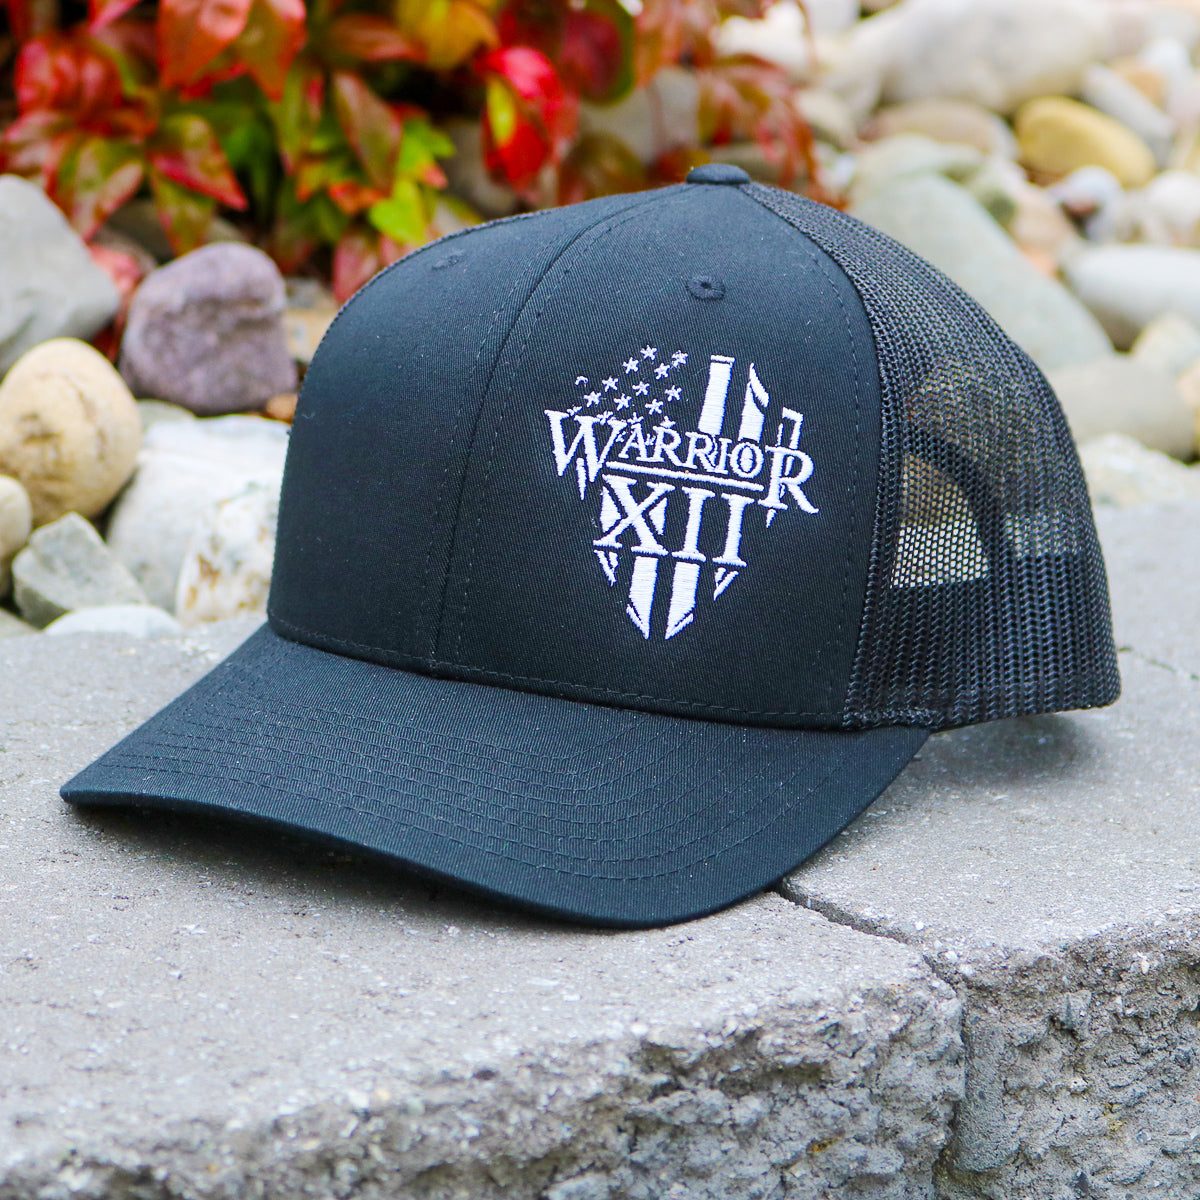 A Warrior 12 hat features the Warrior 12 shield embroidered on a black Richardson mesh snapback hat.